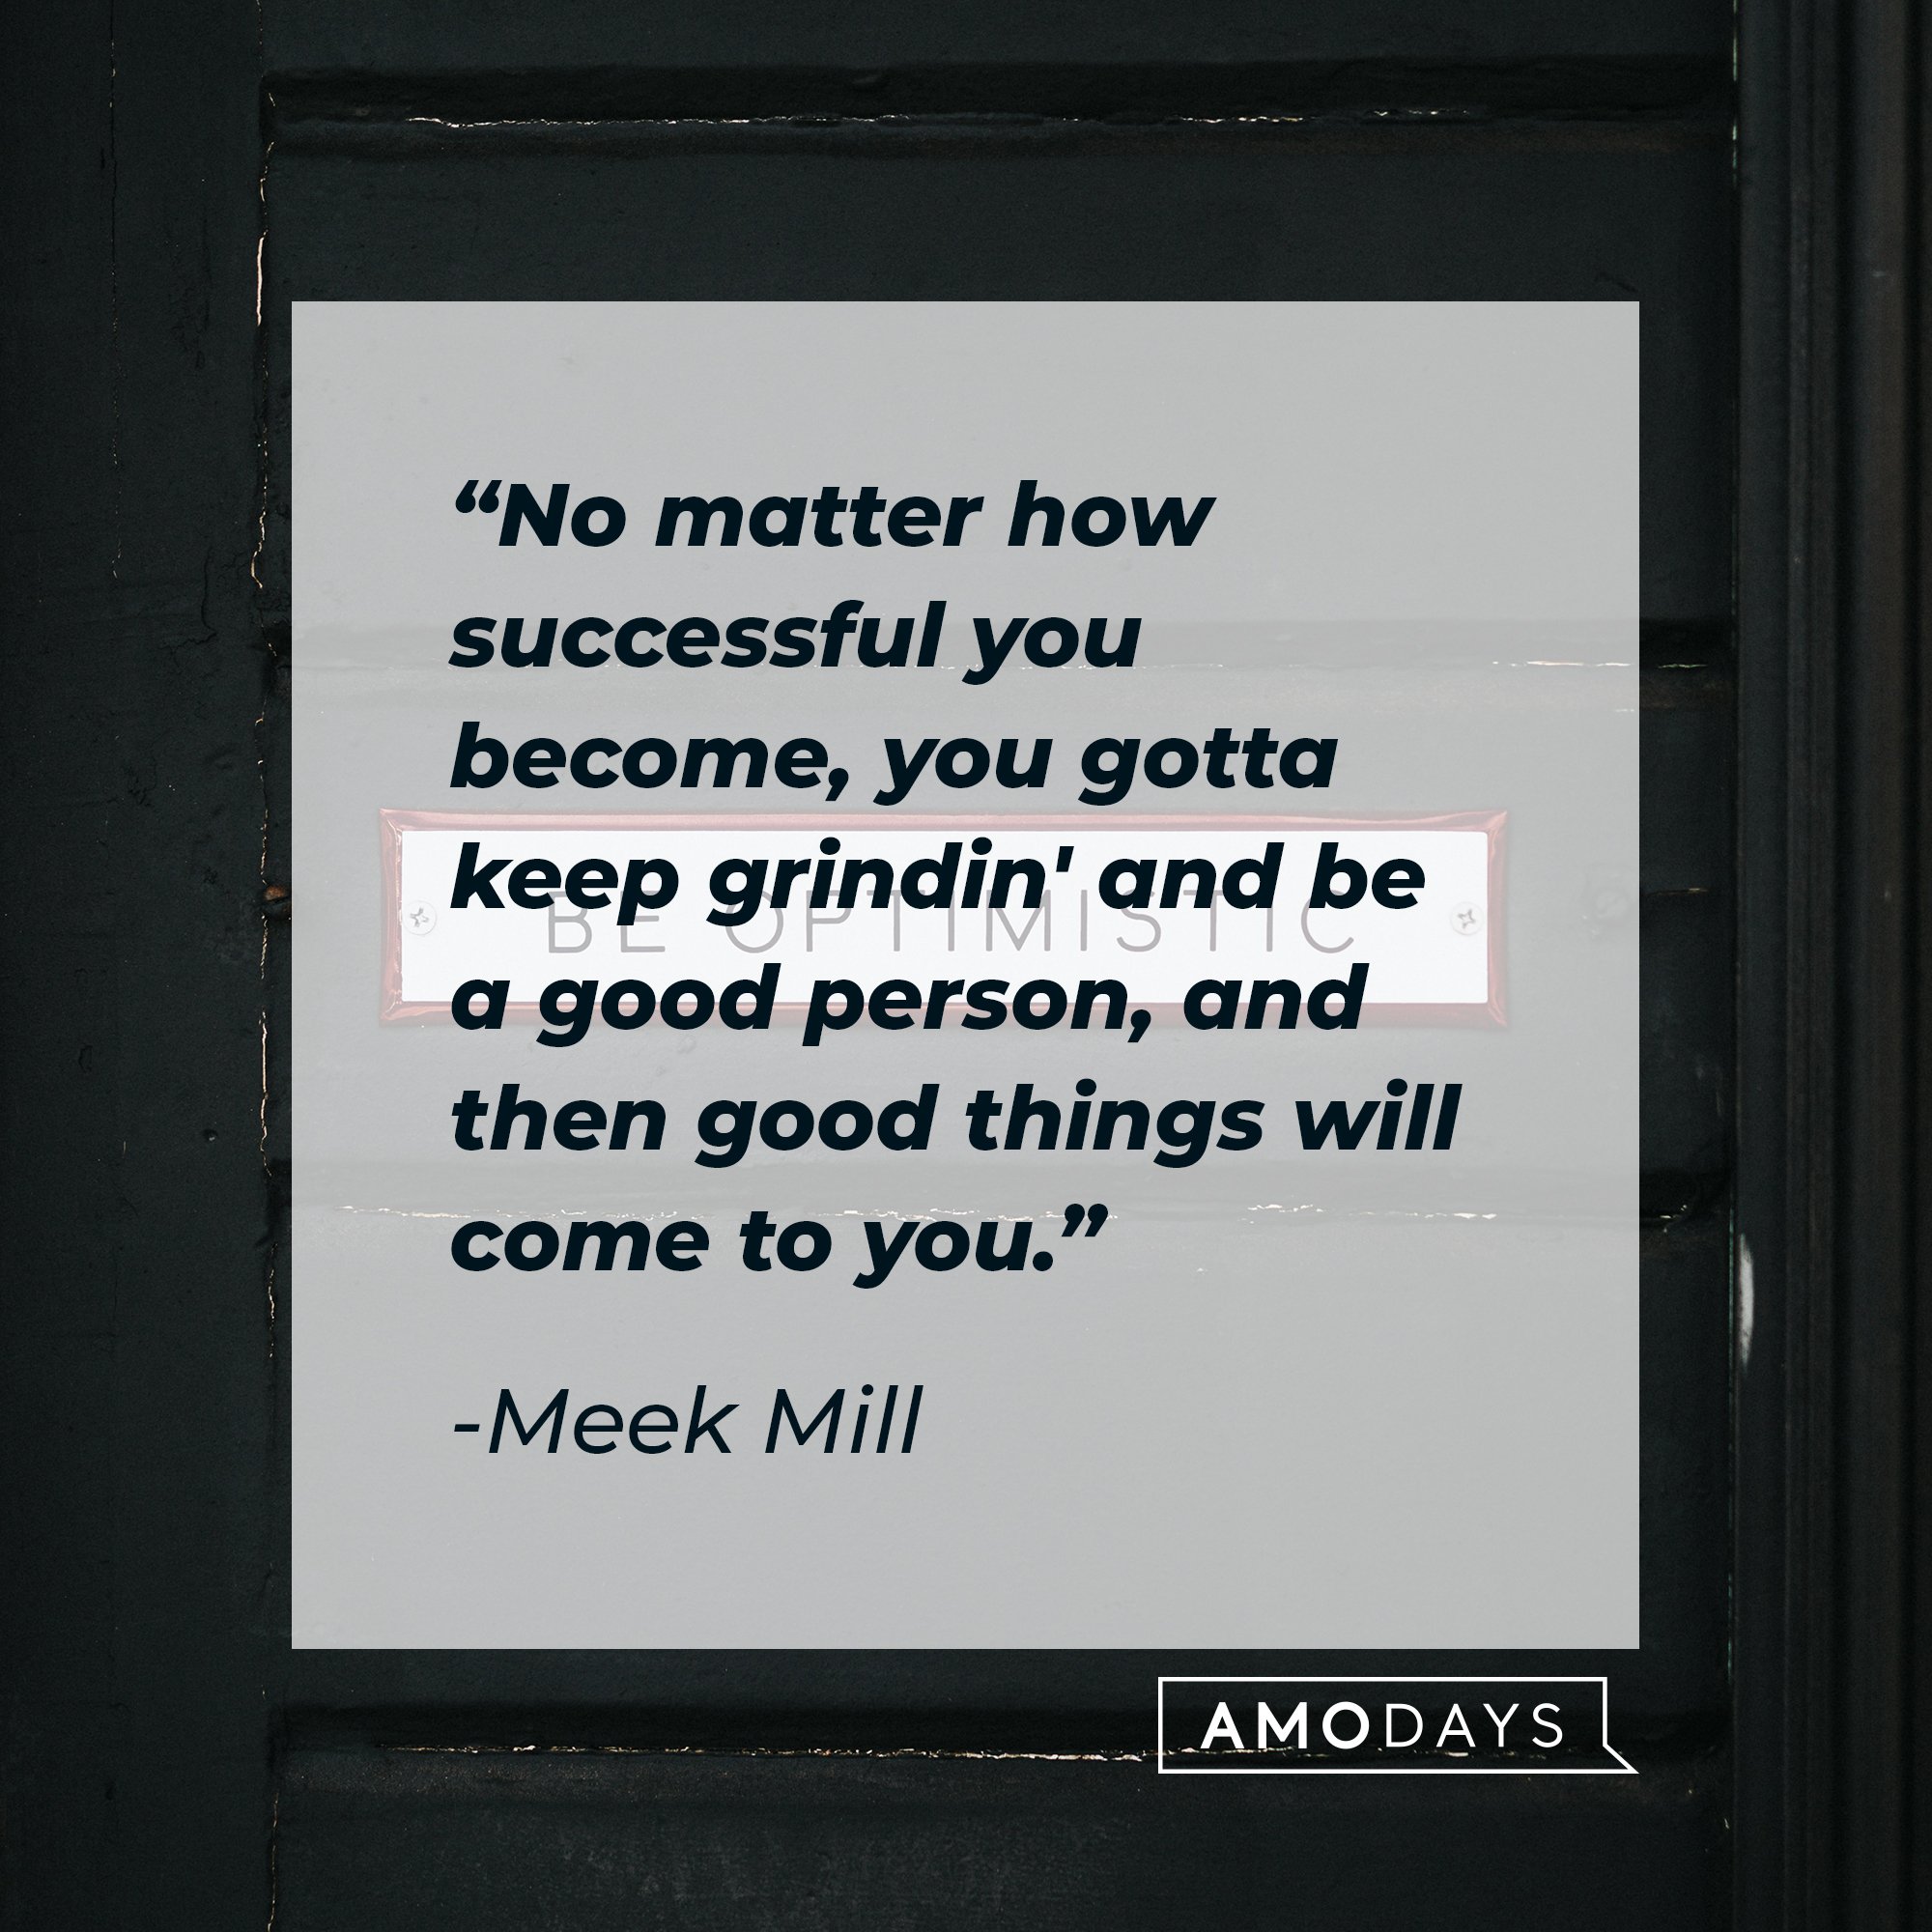 Meek Mill’s quote: "No matter how successful you become, you gotta keep grindin' and be a good person, and then good things will come to you." | Image: AmoDays 